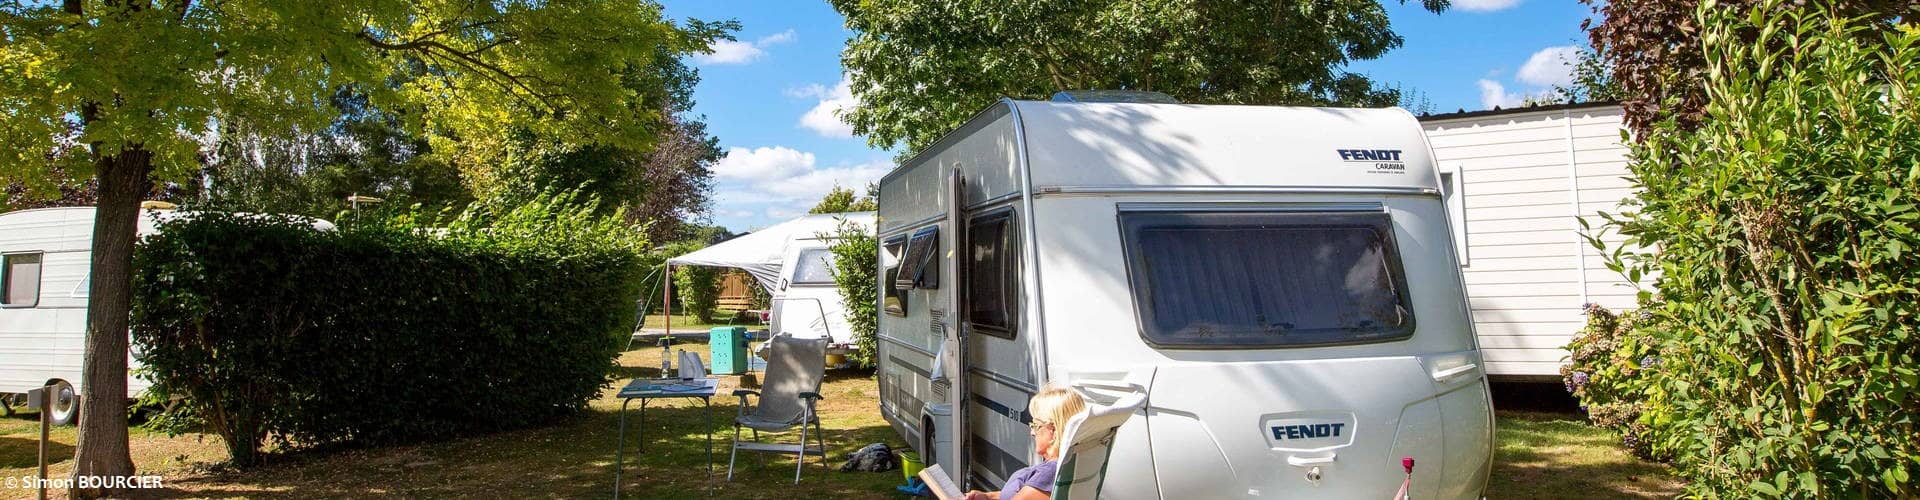 Ideas for outings around the campsite